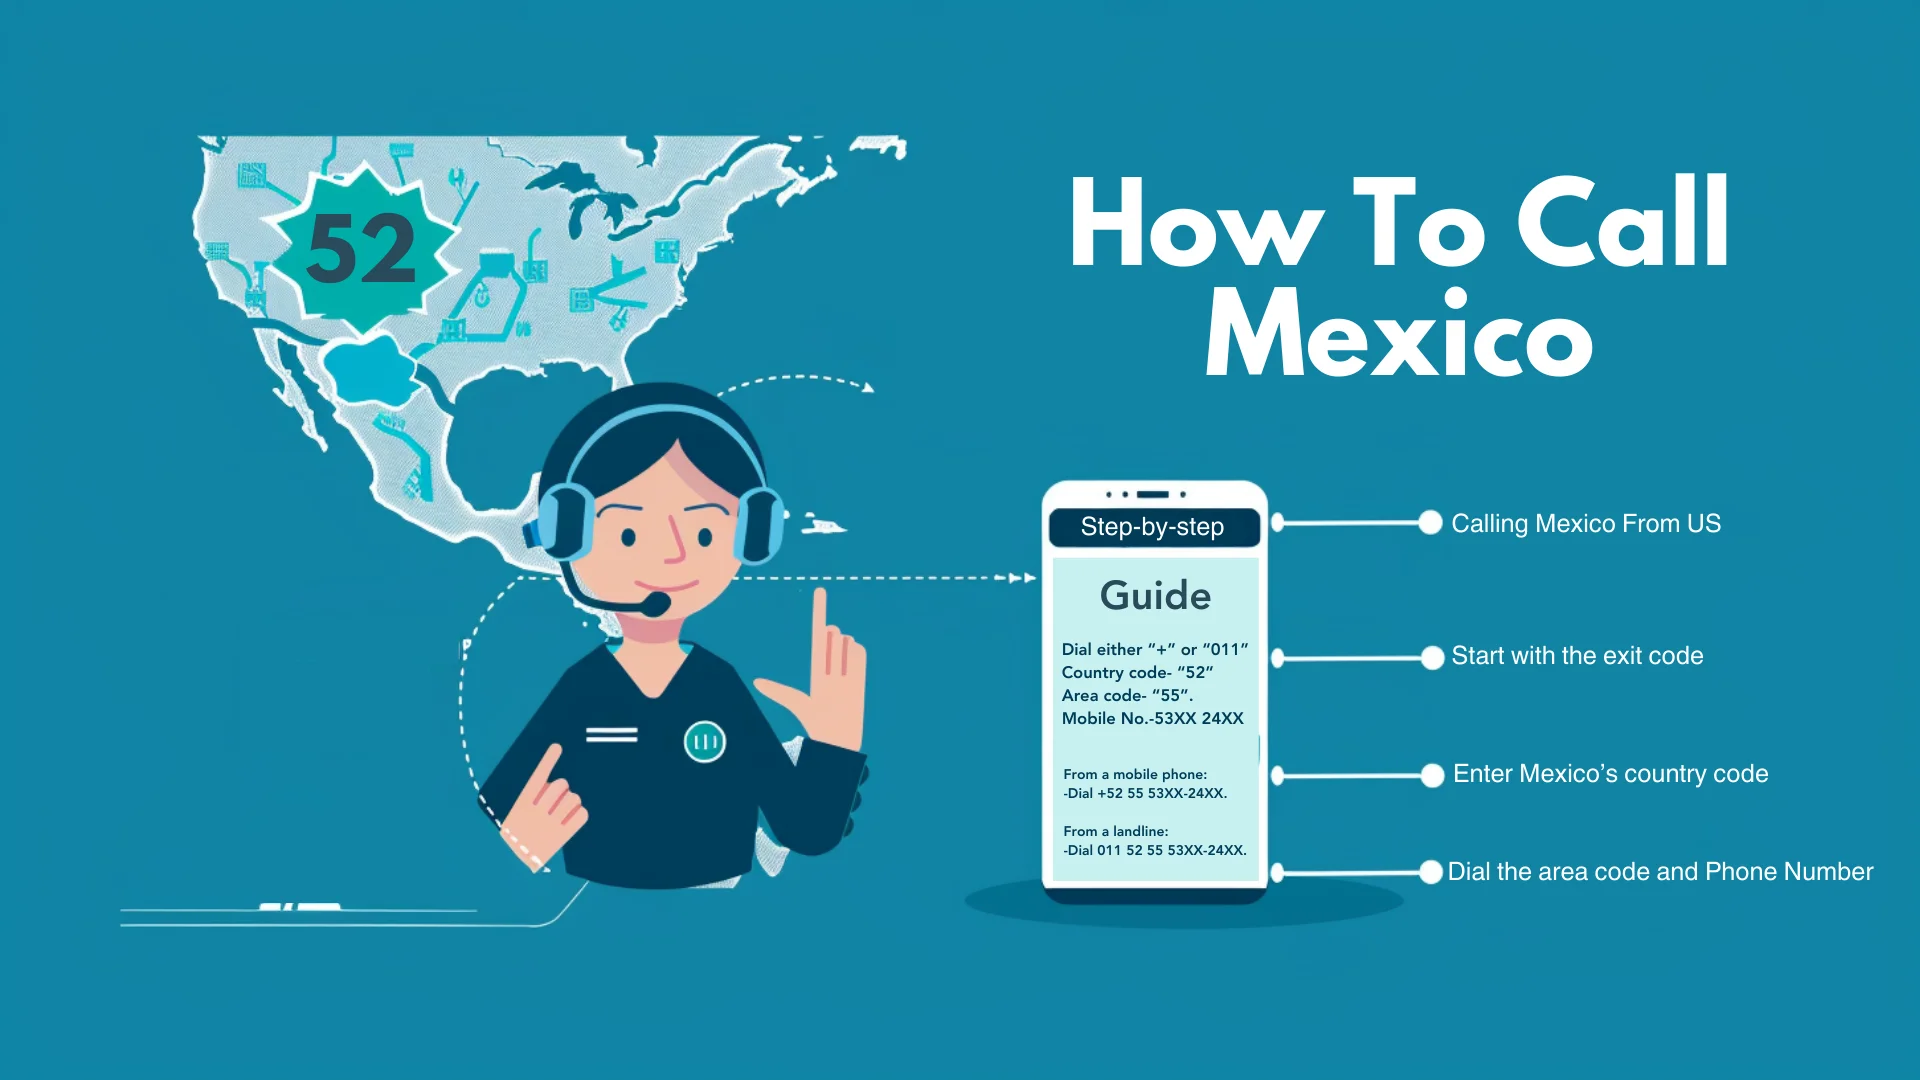 How To Call Mexico From the US